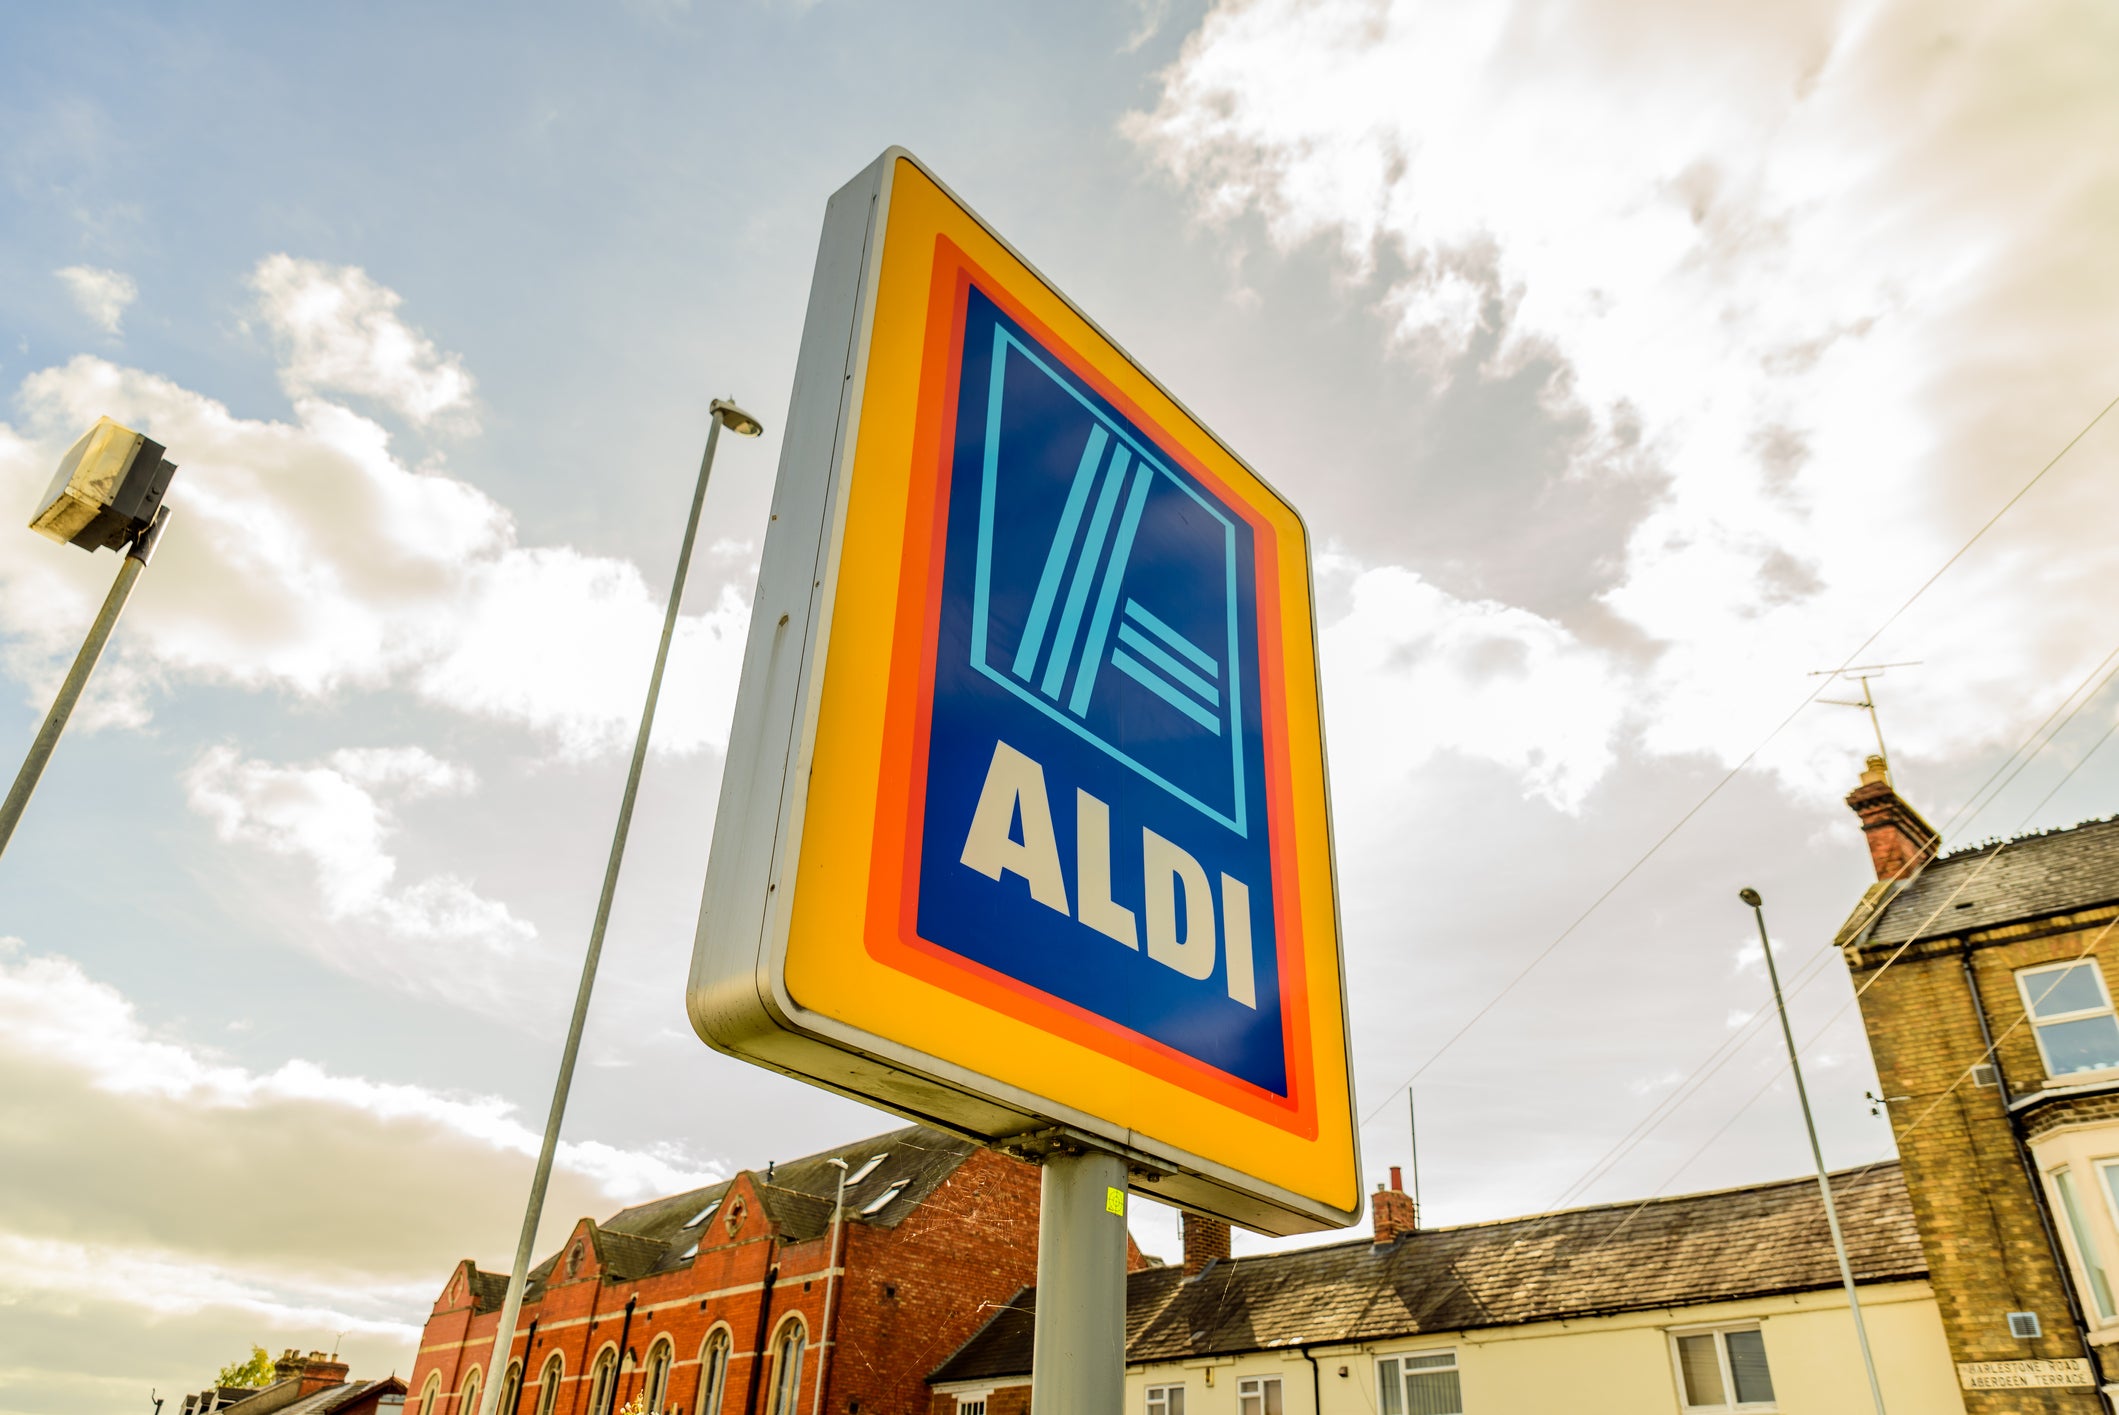 Eating up Britain? Aldi’s expansion shows no signs of slowing